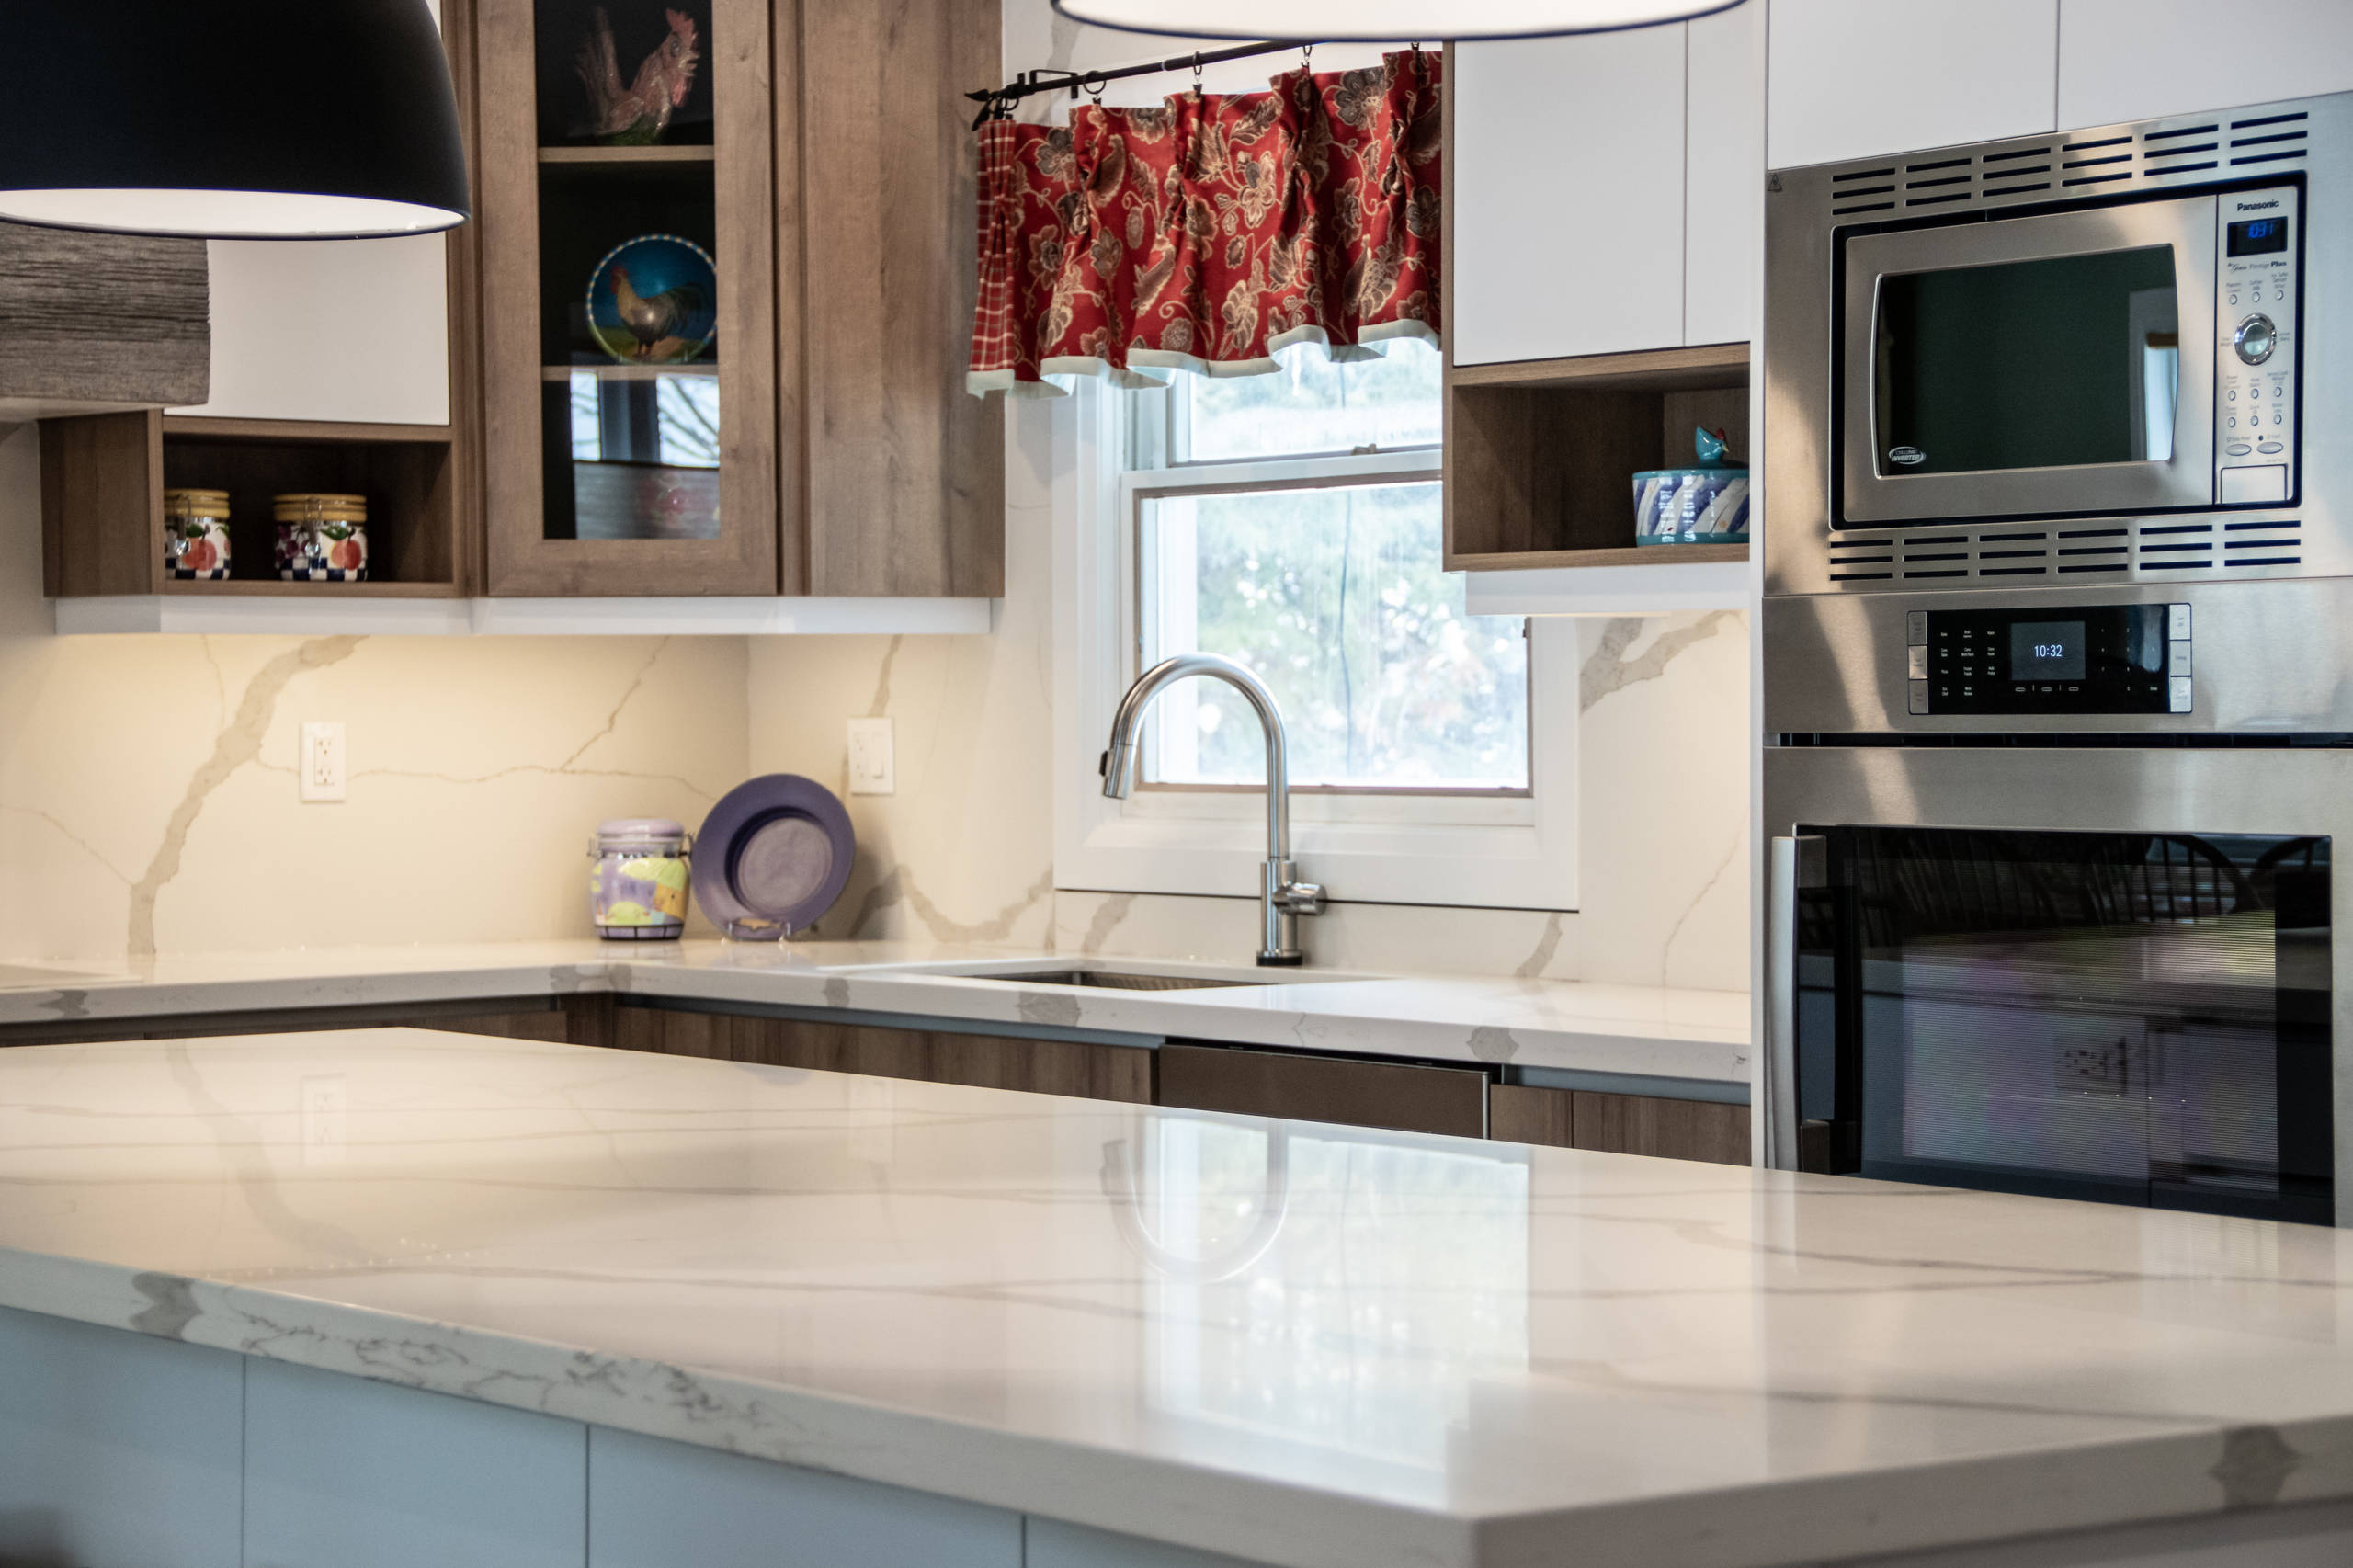 75 Laminate Floor Kitchen with Distressed Cabinets Ideas You'll Love -  October, 2022 | Houzz